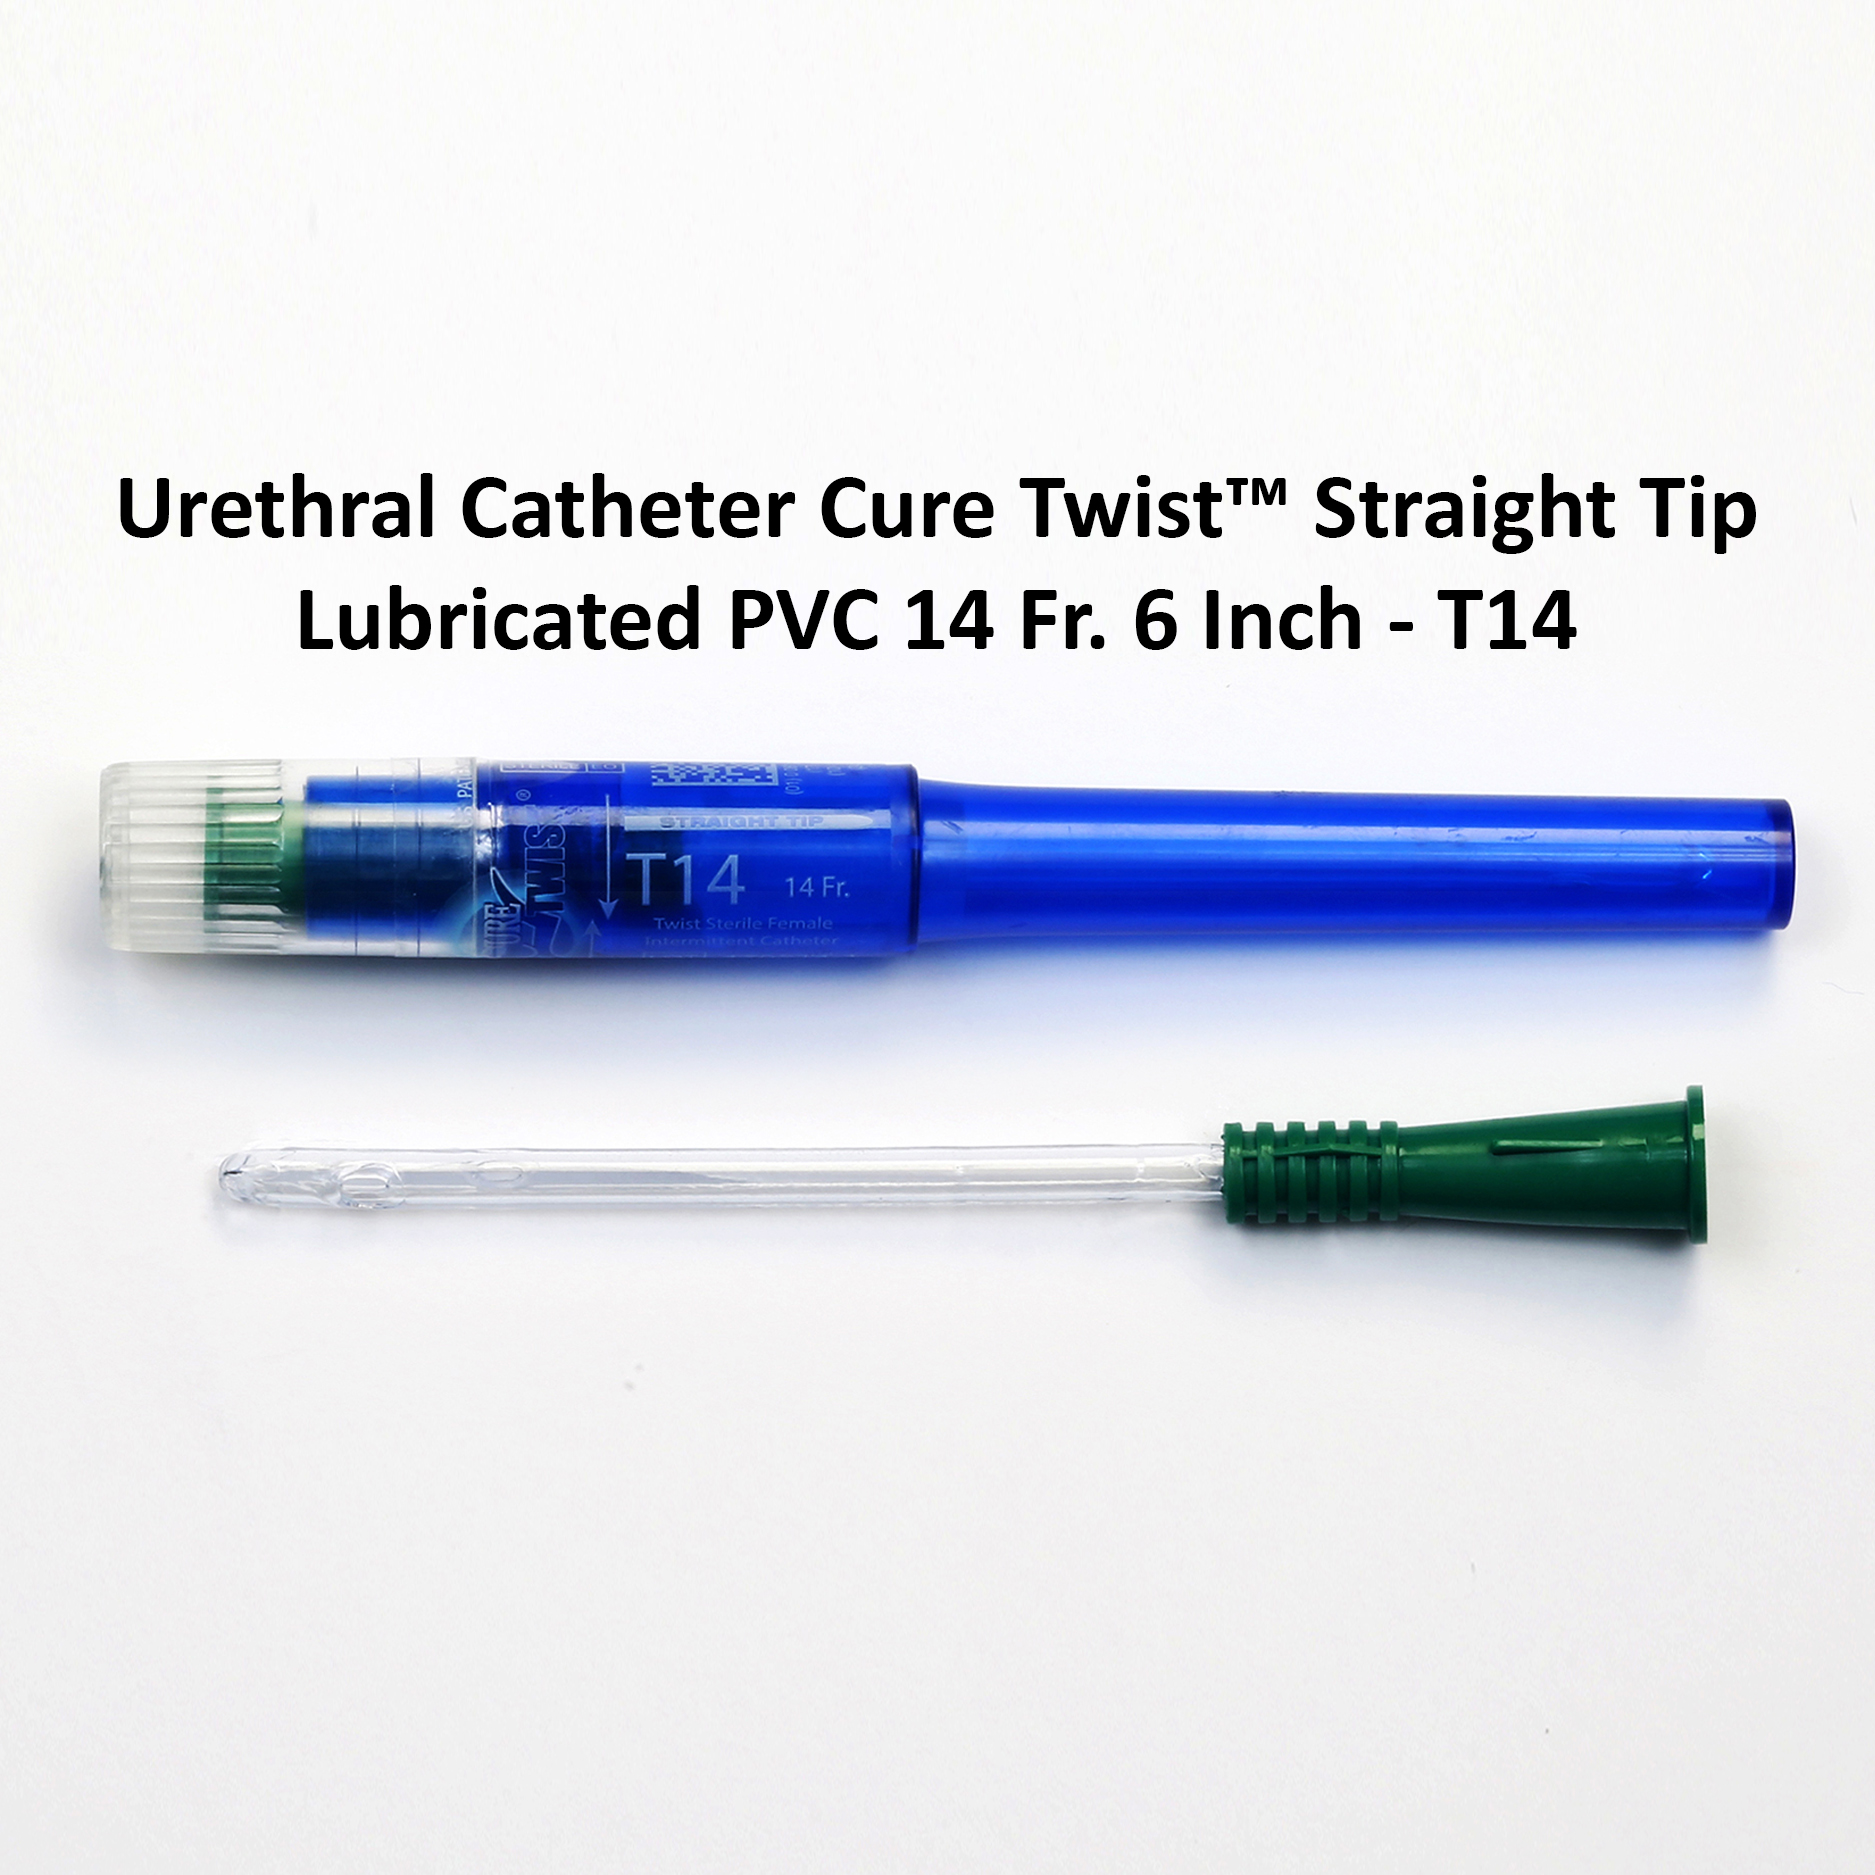 Urethral Catheter Cure Twist™ Straight Tip Lubricated PVC 14 Fr. 6 Inch - T14